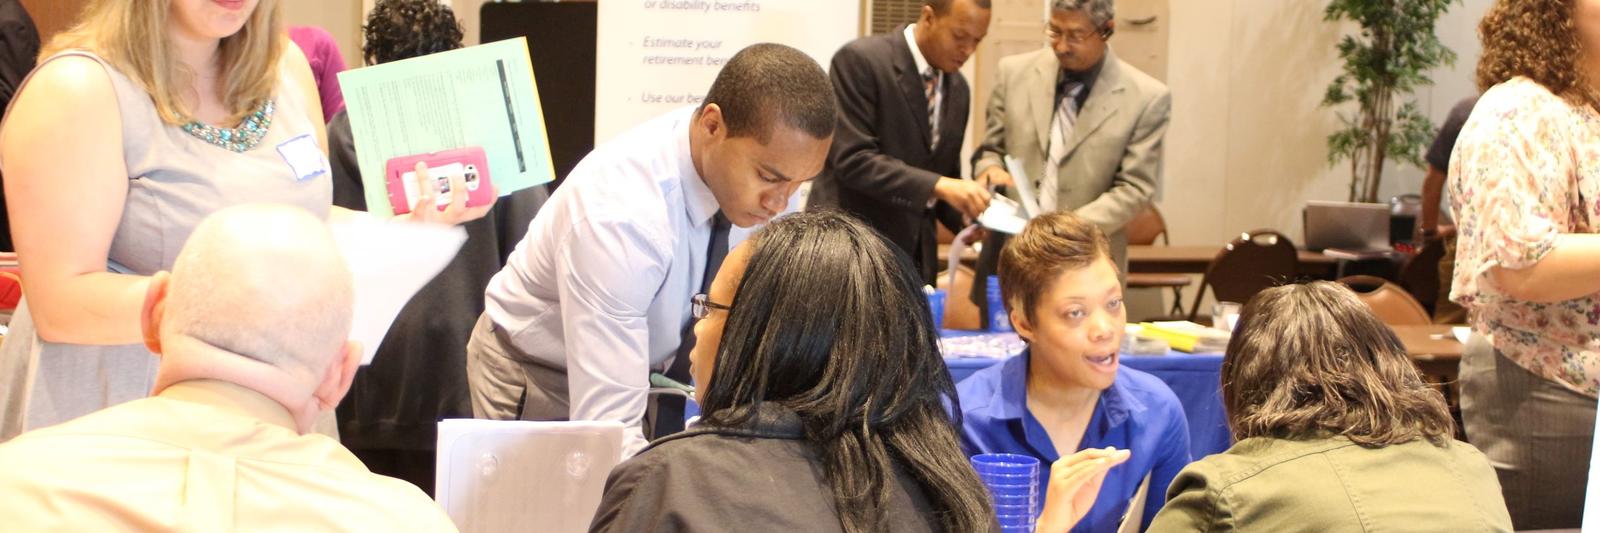 Social Security Administration Recruiting With UNCP 